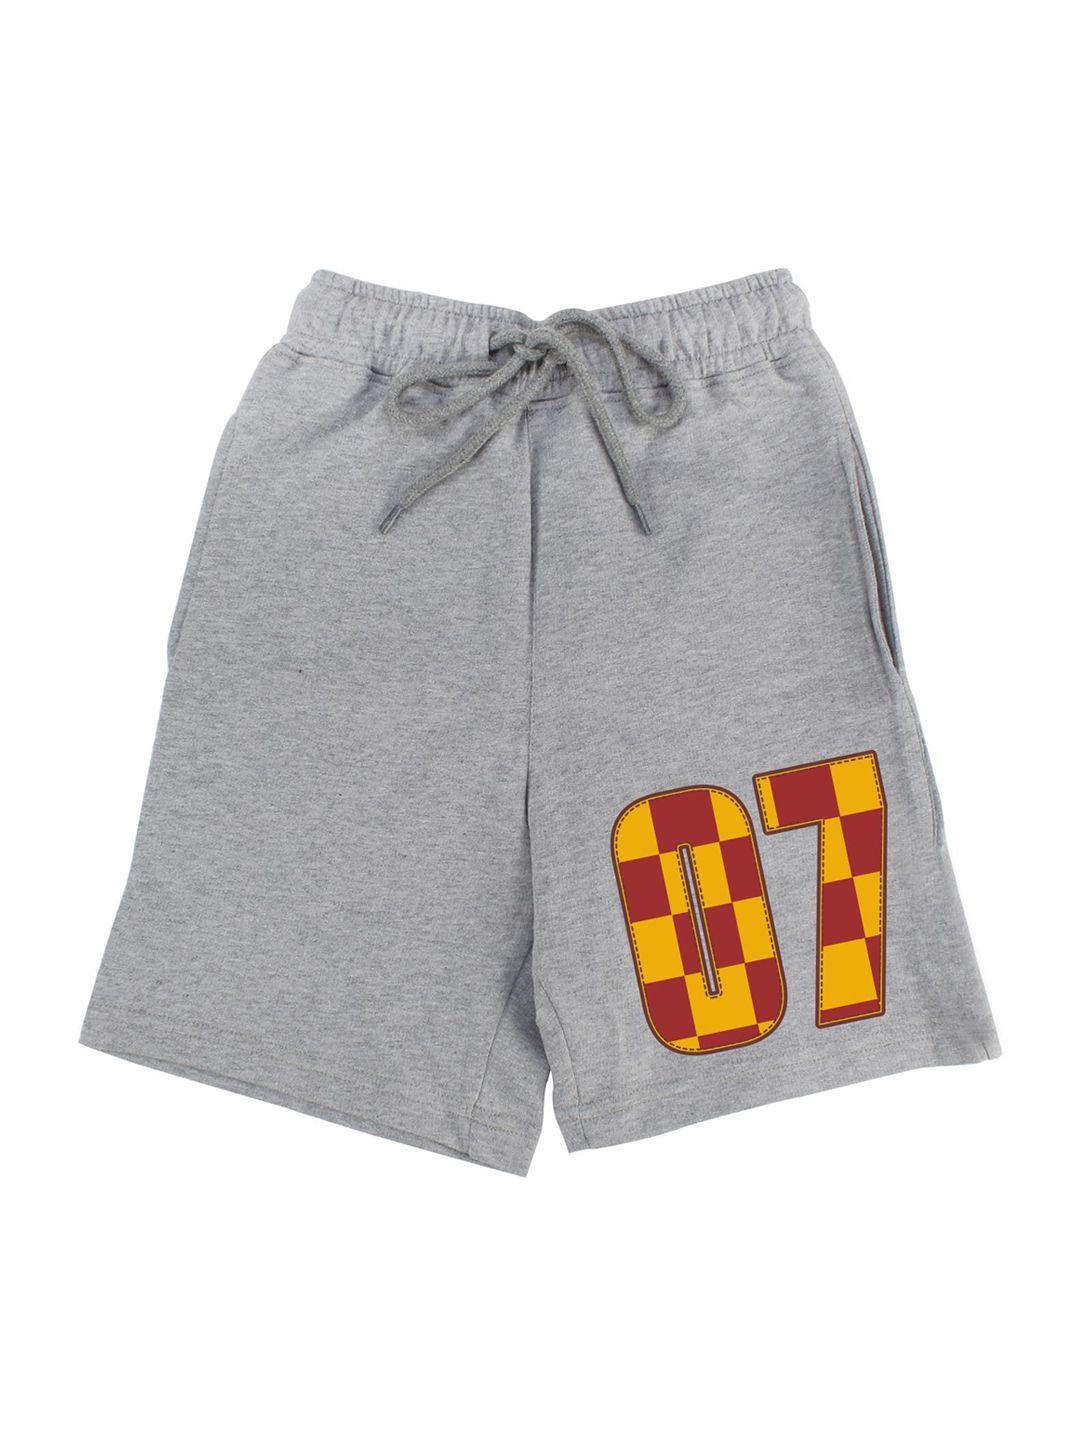 harry potter by wear your mind boys grey typography printed shorts